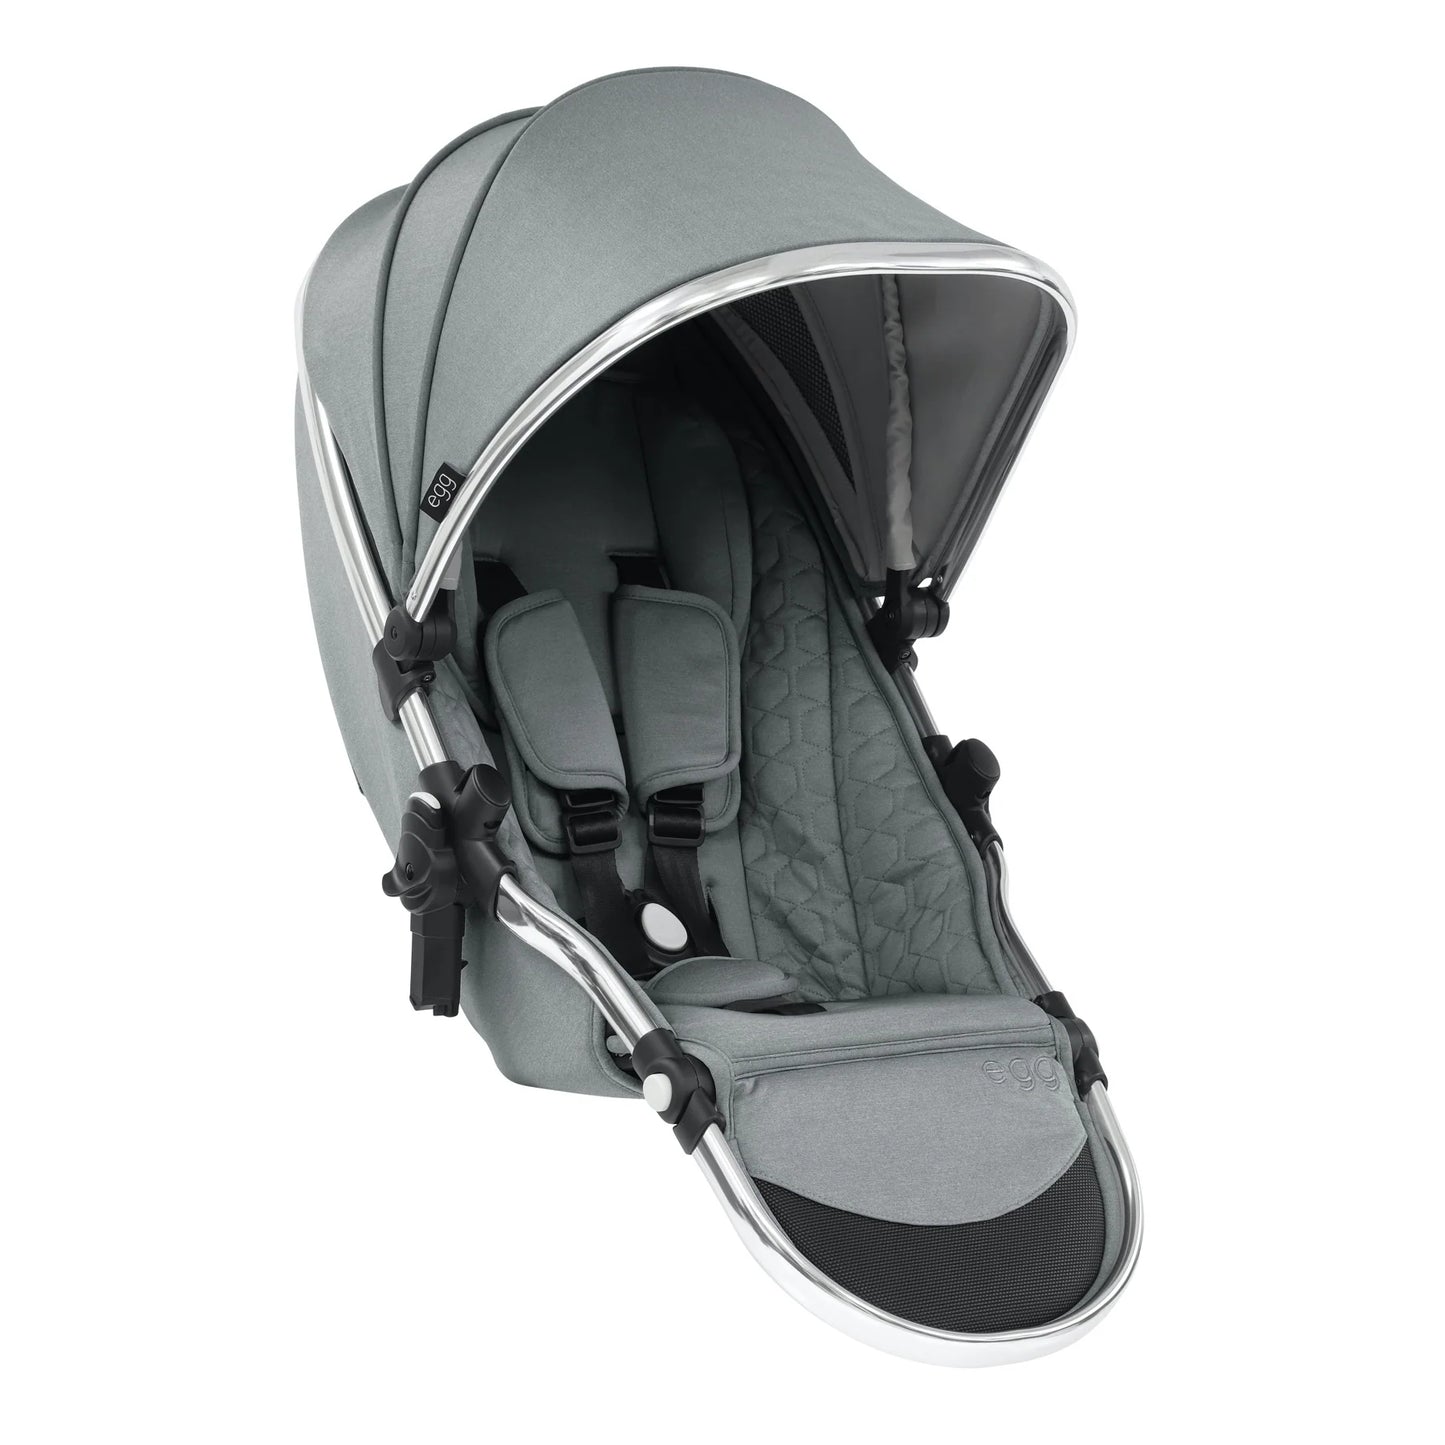 egg2® Double Stroller in Monument Grey